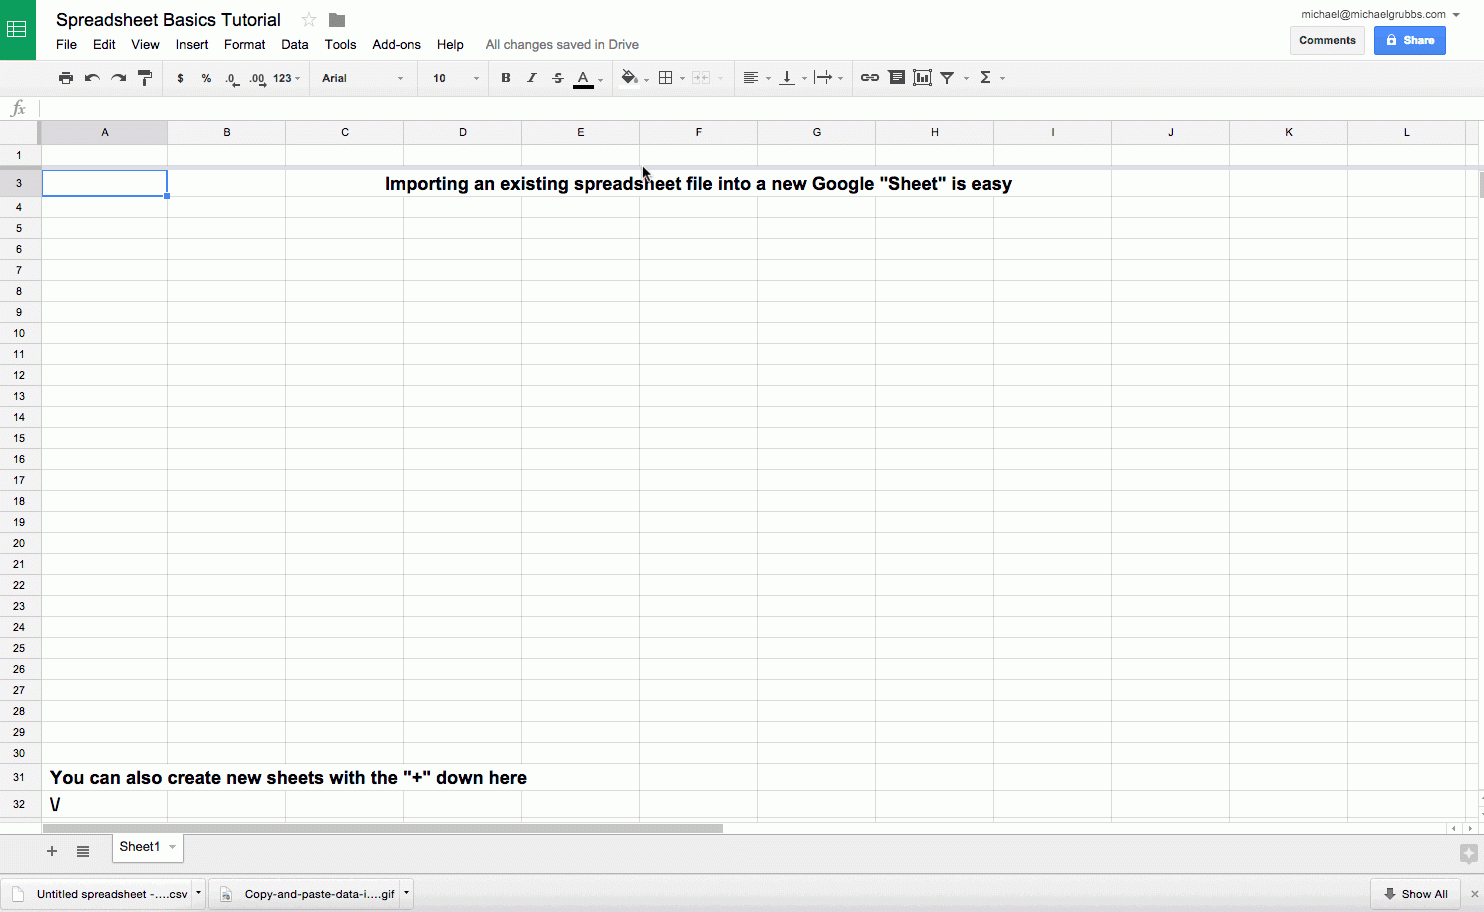 How Do I Create A Spreadsheet Inside Google Sheets 101: The Beginner's Guide To Online Spreadsheets  The